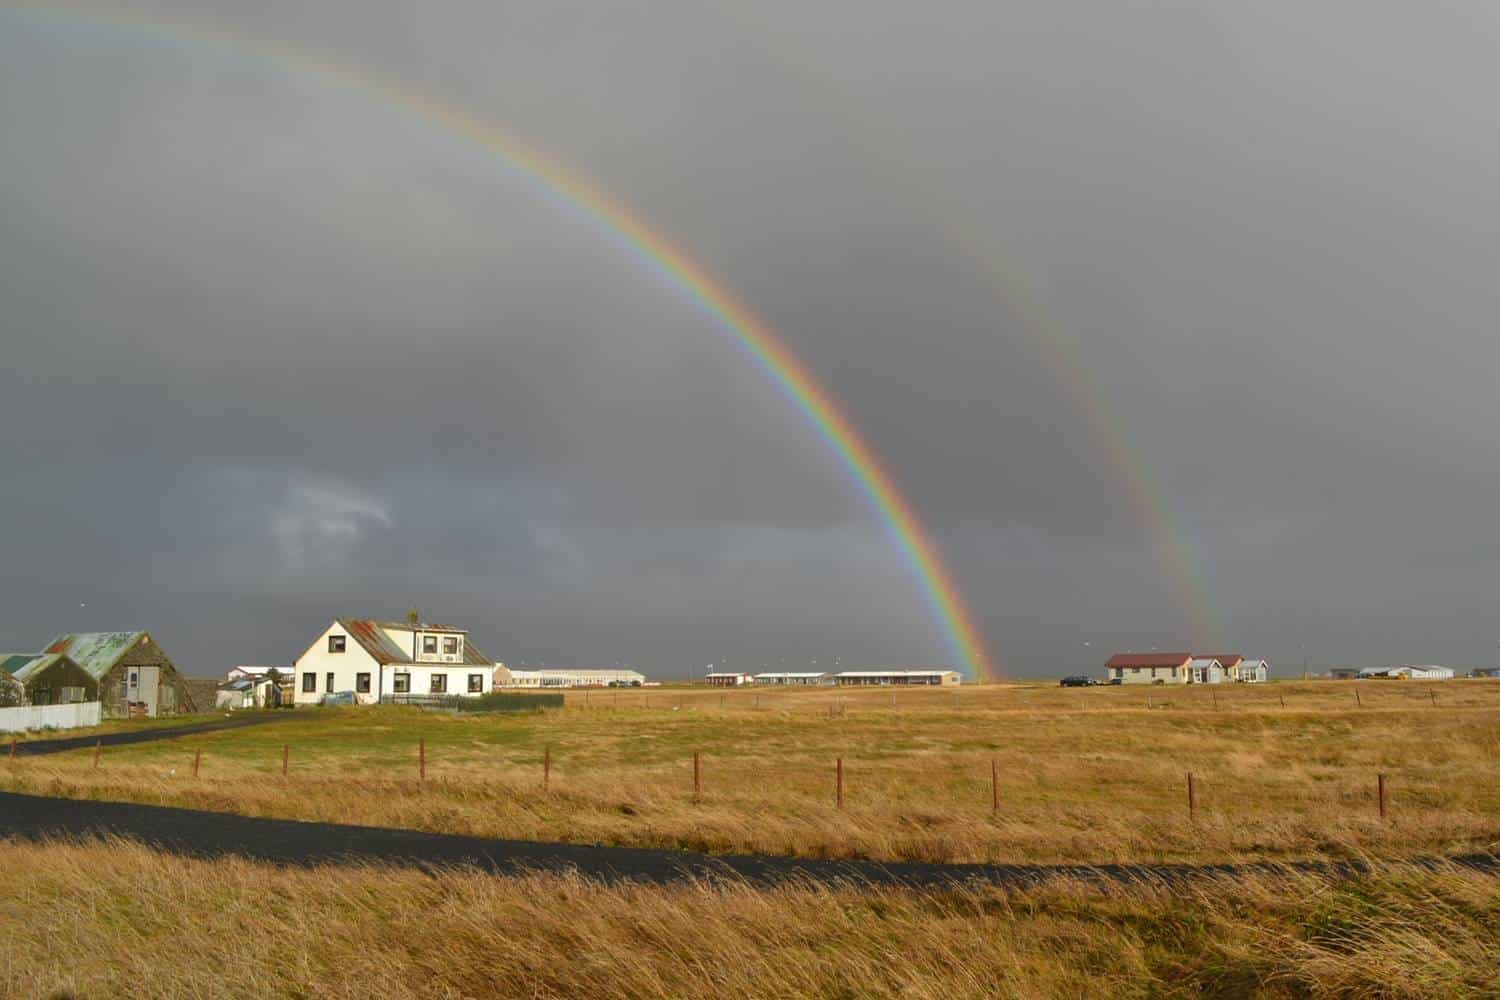 Double rainbows in Iceland are not rare